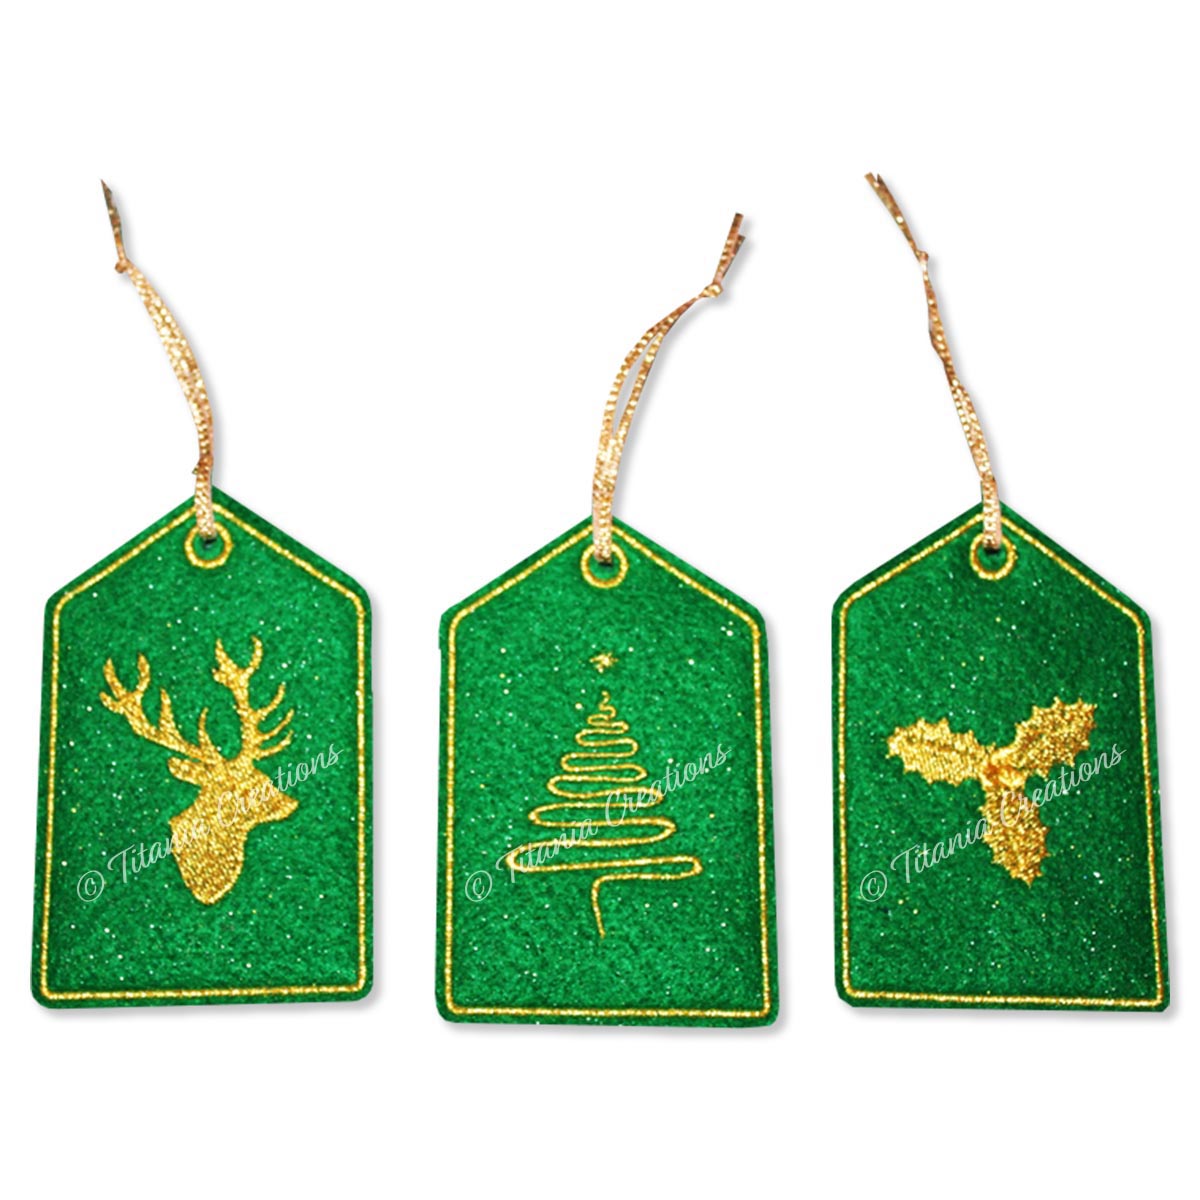 ITH Golden Christmas Gift Tags 4x4